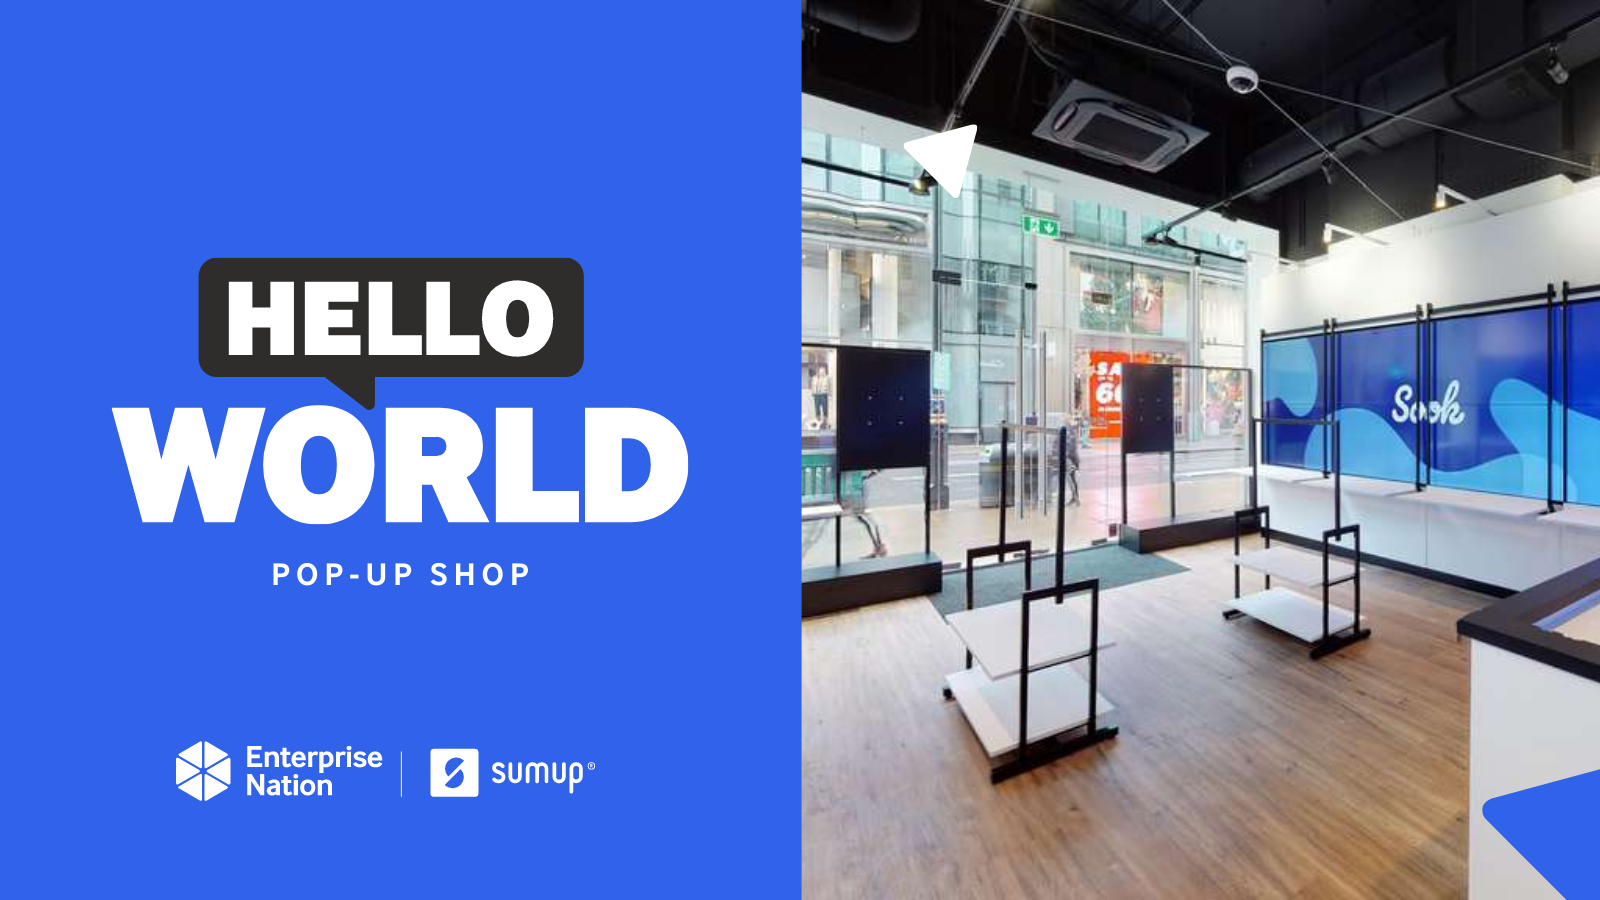 Meet the brands popping up in the Hello, World shop in May